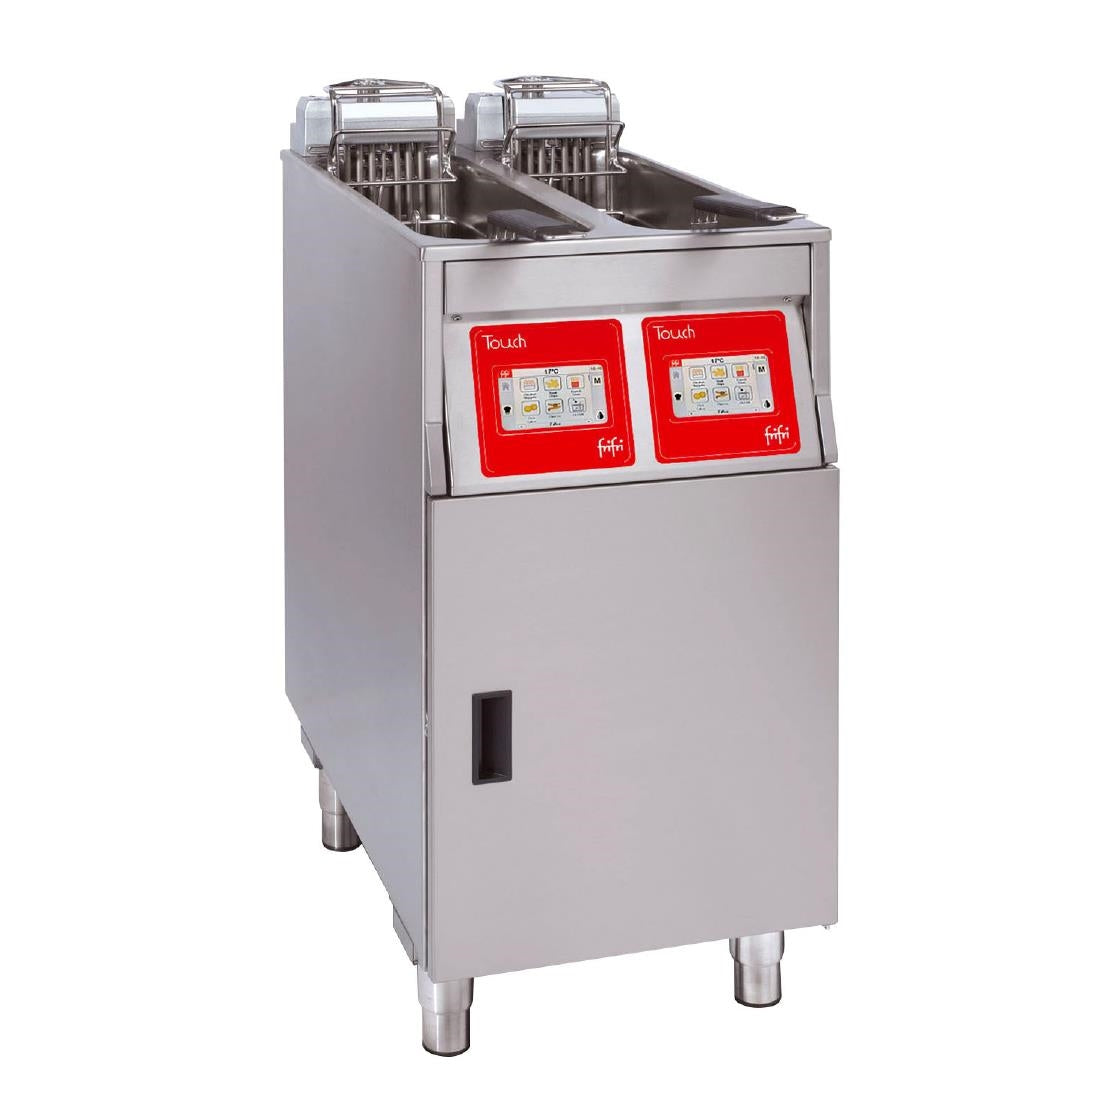 HS015-3PH FriFri Touch 422 Electric Free-Standing Twin Tank Fryer 2 Baskets 2x 11kW - Three Phase